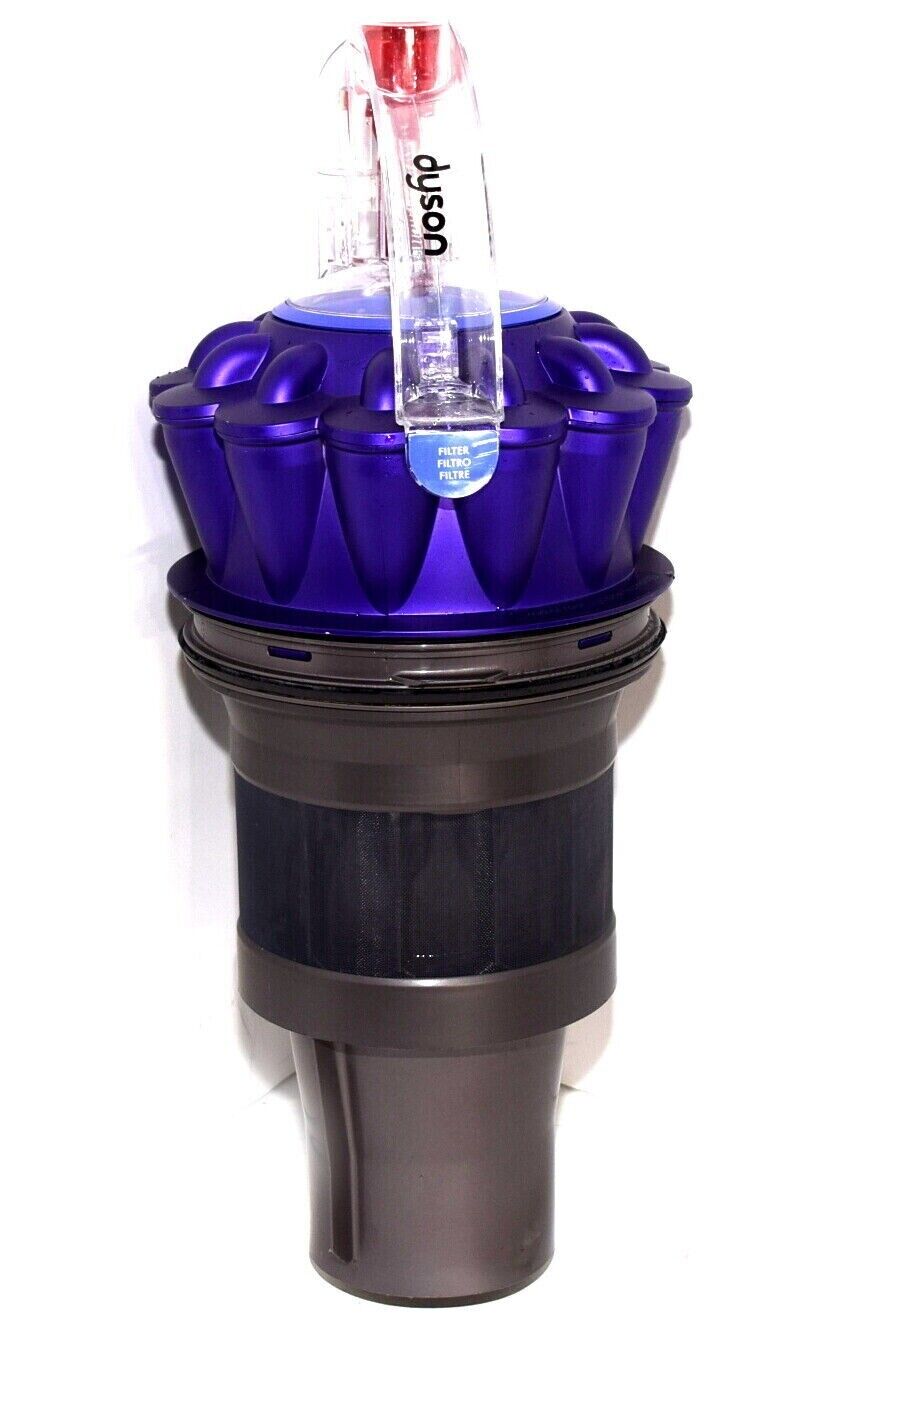 Authentic DYSON UP13 DC41 DC65 Ball Pro Multi Vacuum Cyclone Assembly - Purple